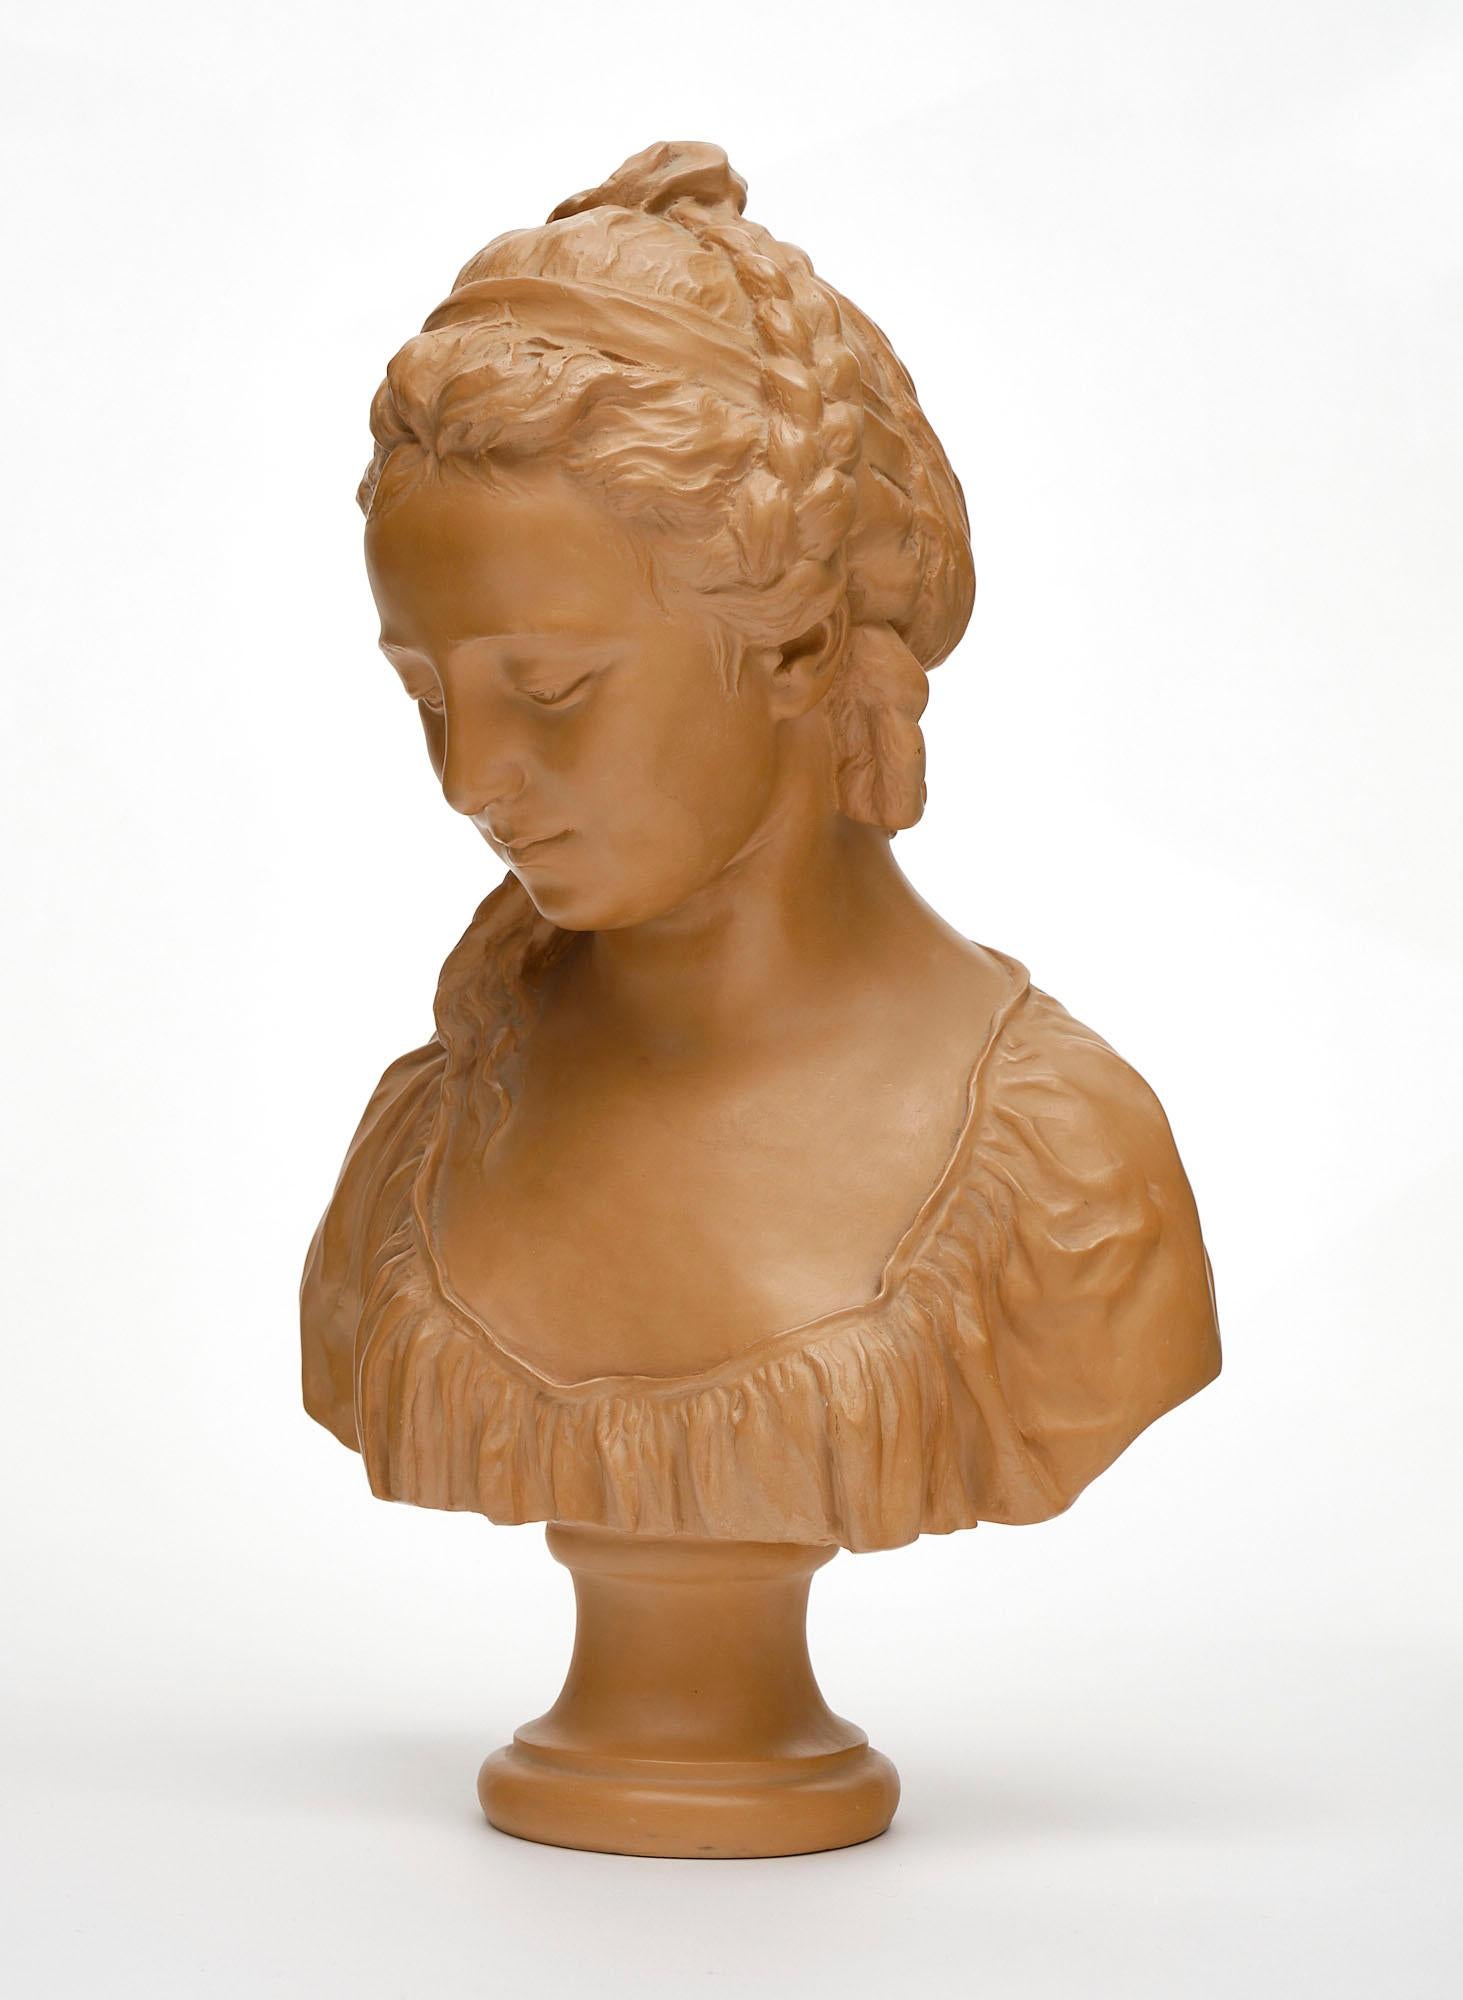 Sculptural bust from France hand-crafted in terracotta. This finely detailed vintage work of art features the likeness of a woman and has a wonderful warm tone.